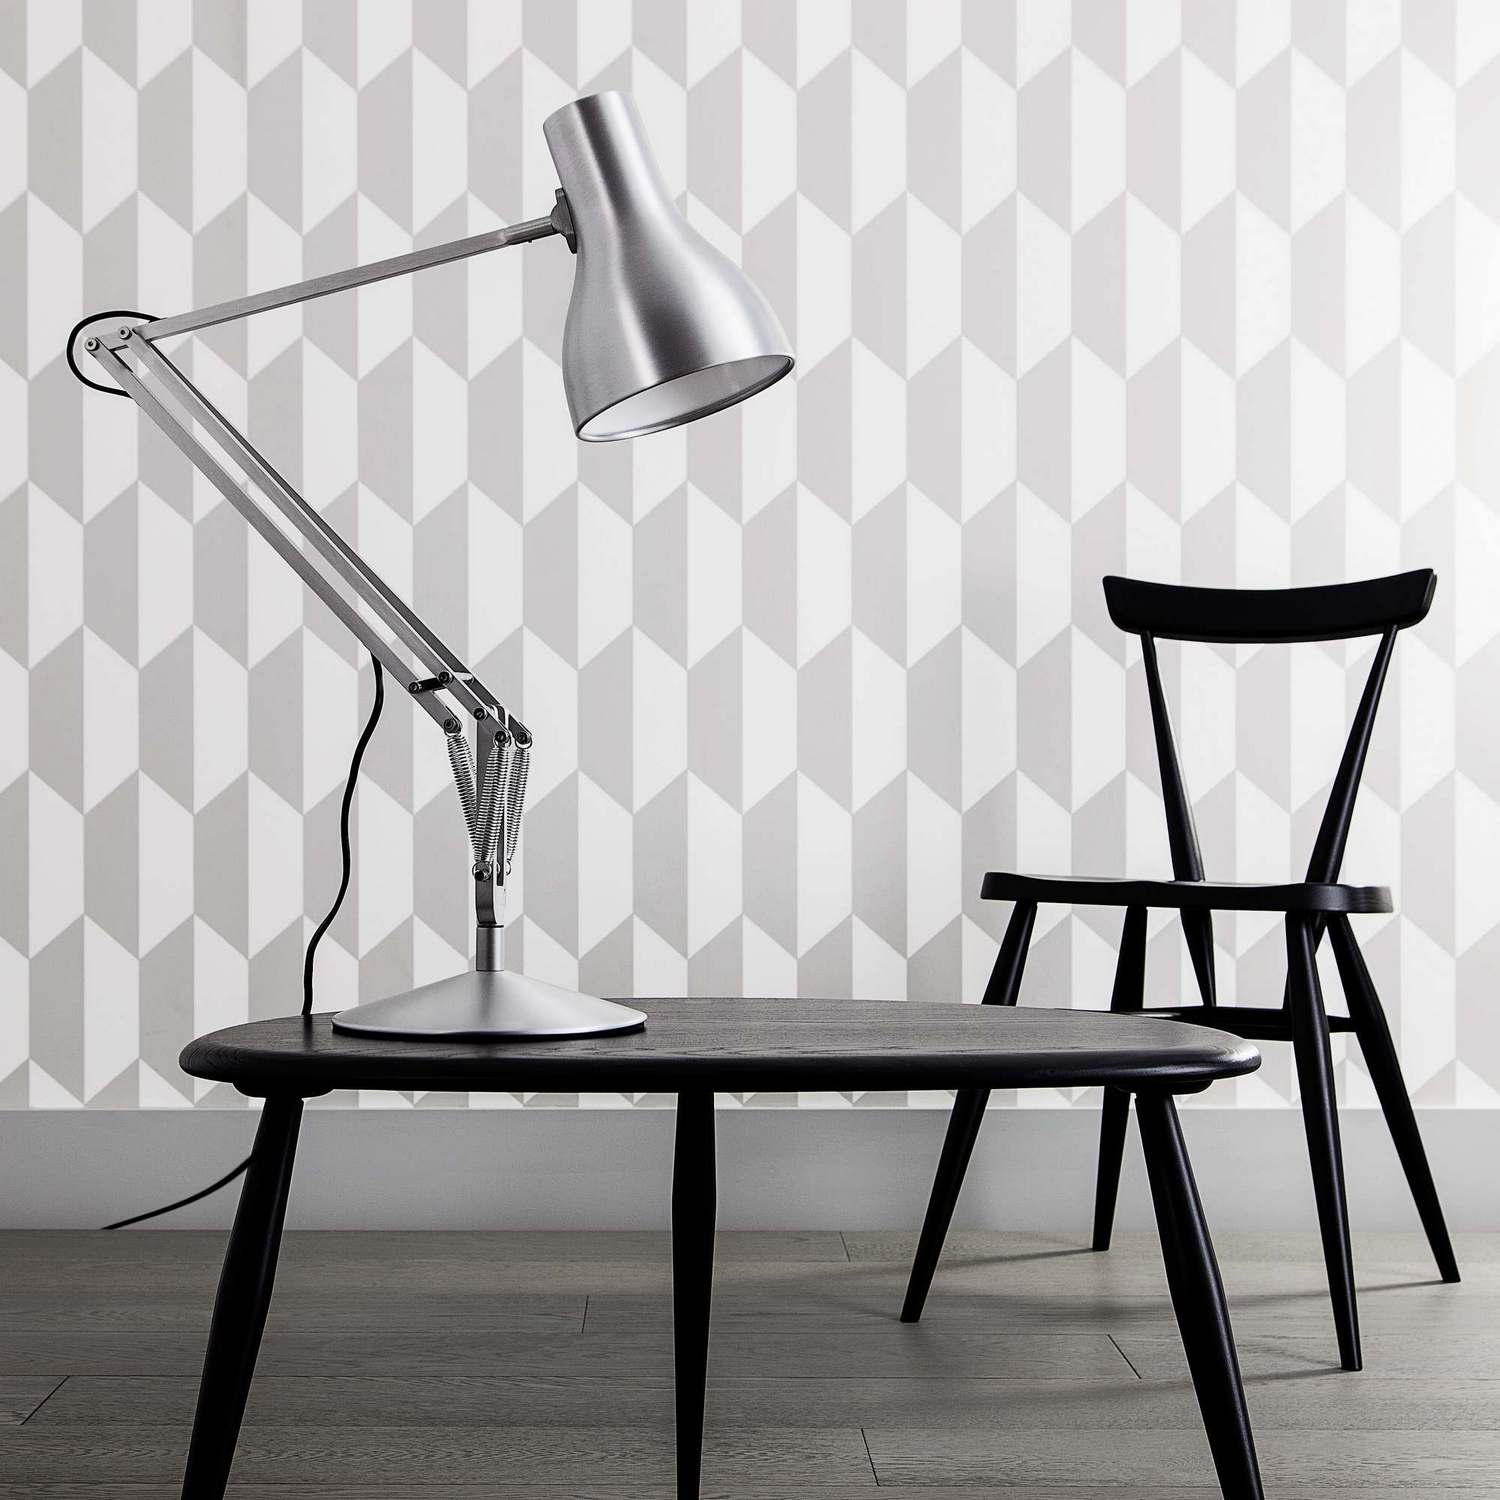 Type 75 Desk lamp table lamp Anglepoise